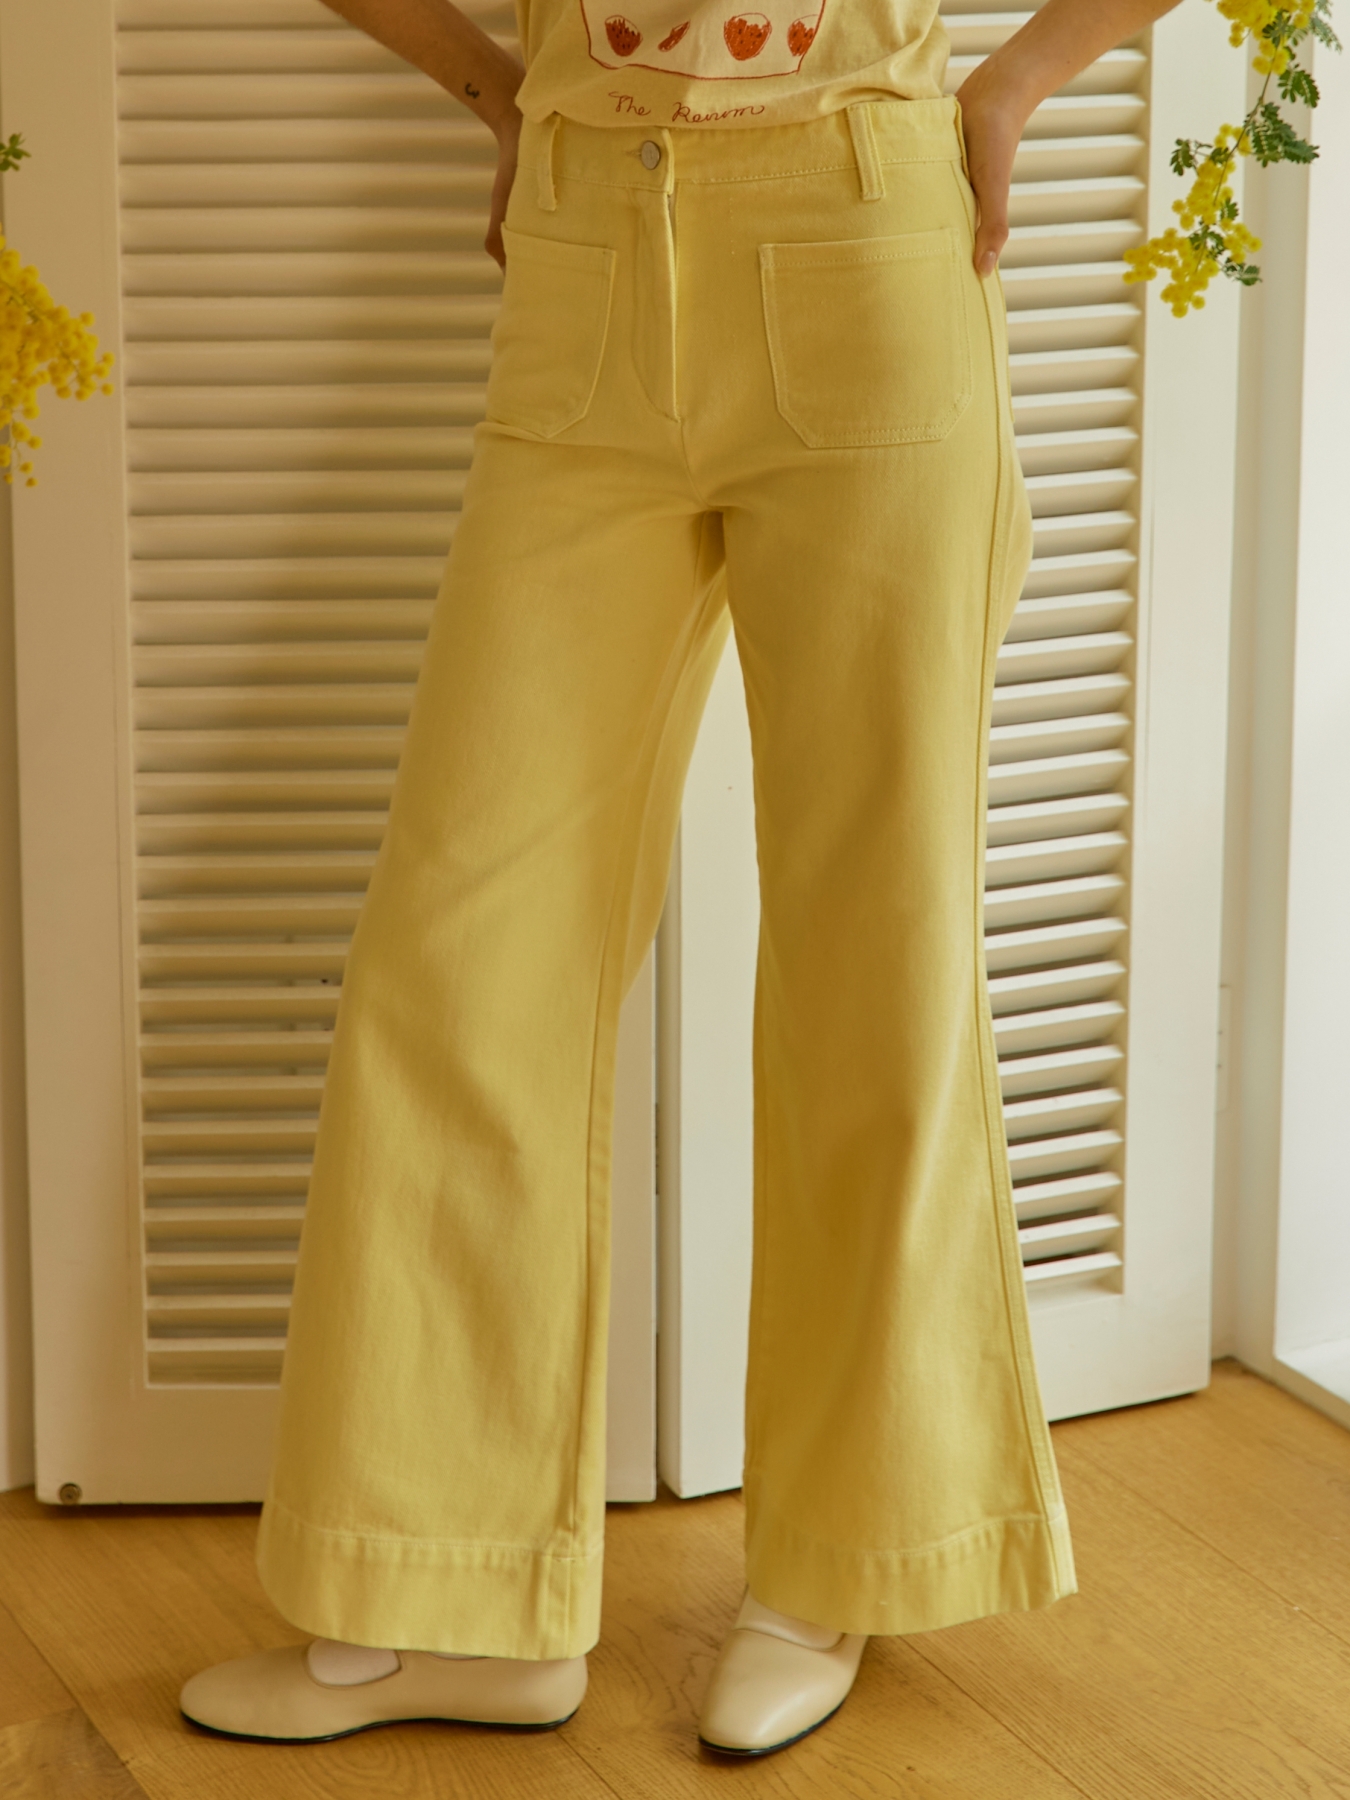 2ND / EMIL HIGH WAISTED JEAN in YELLOW